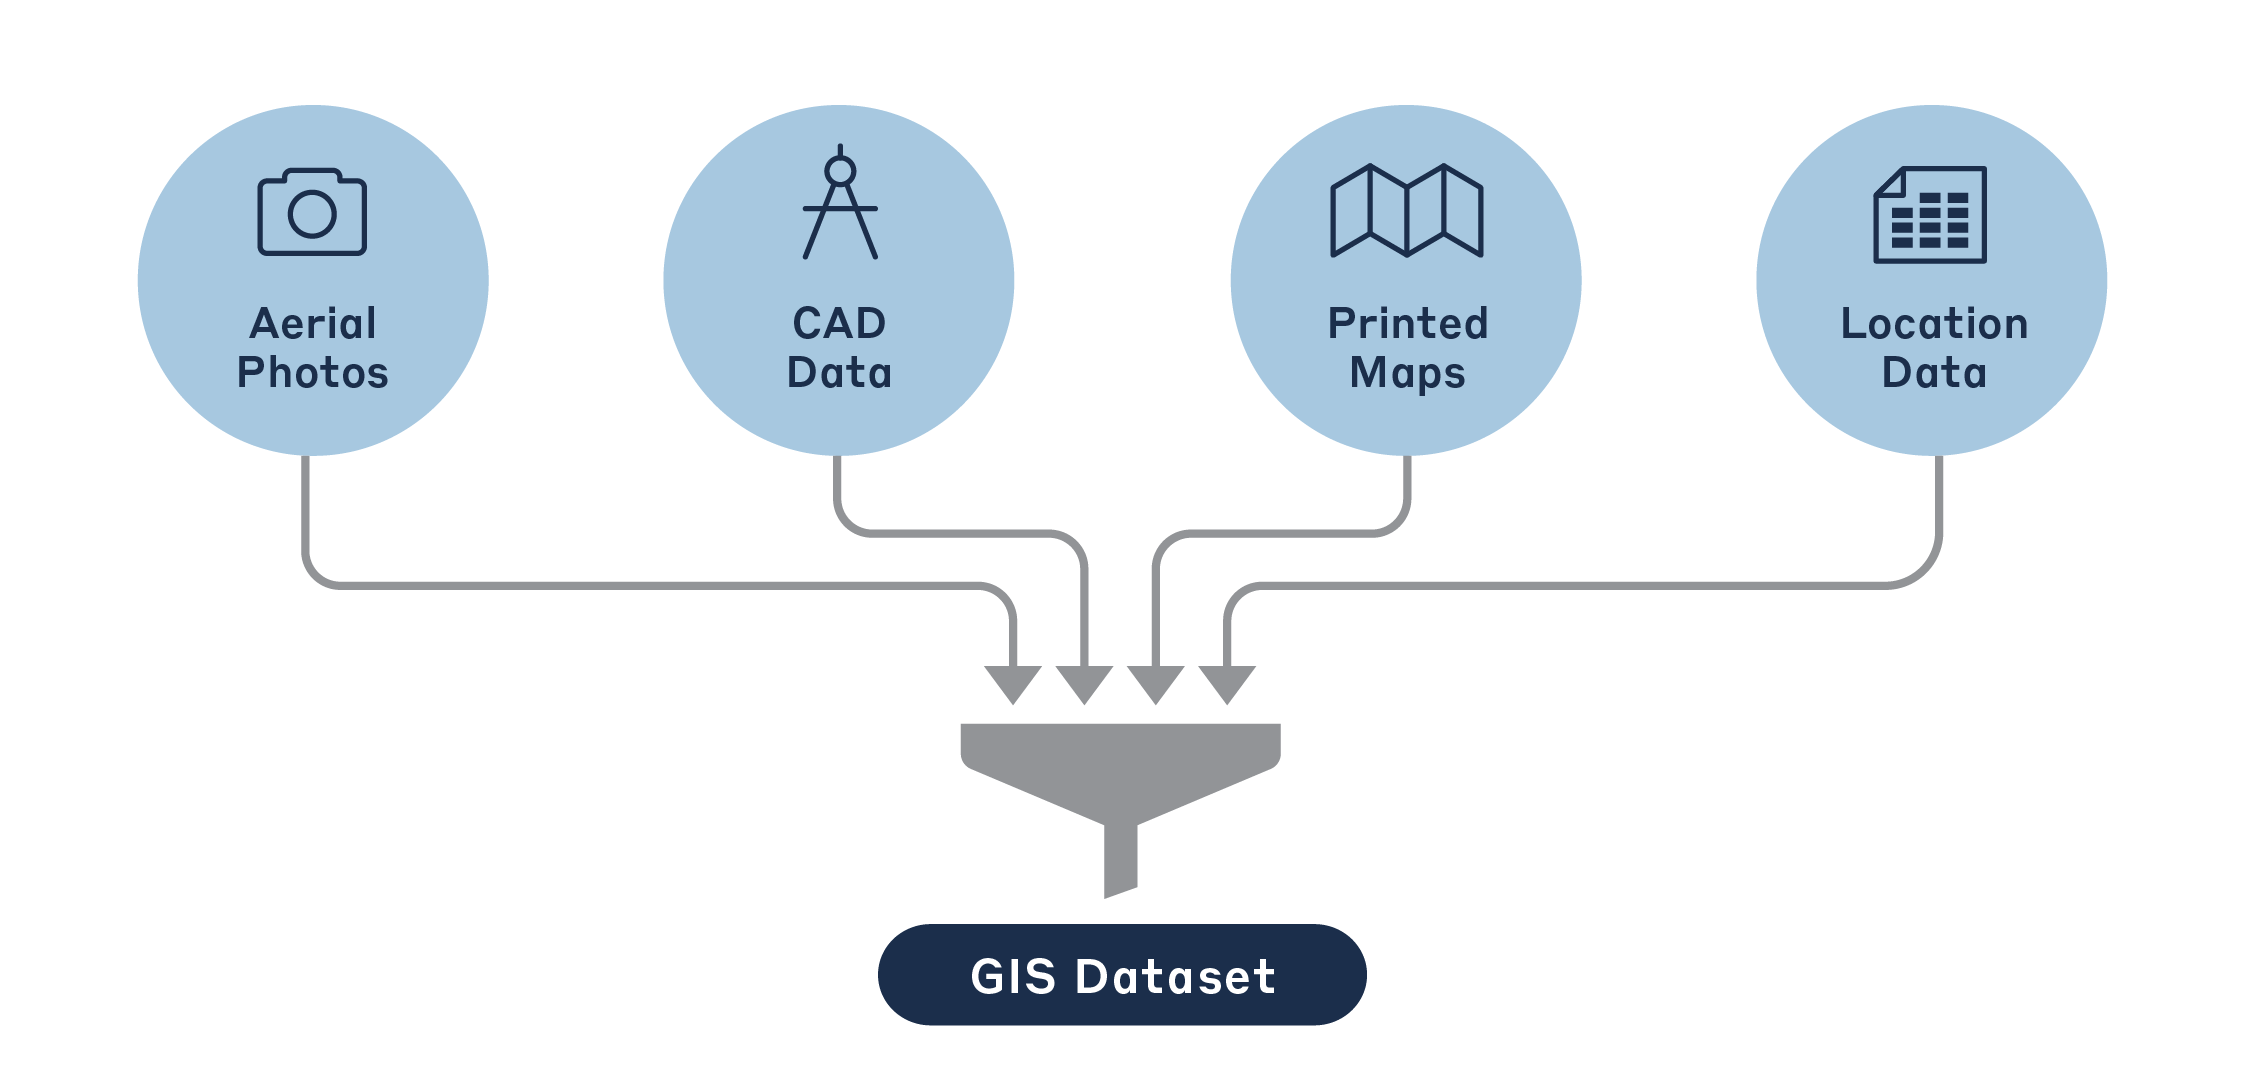 Diagram showing how the combination of Aerial photos, CAD data, printed maps, and location data results in a GIS Dataset.